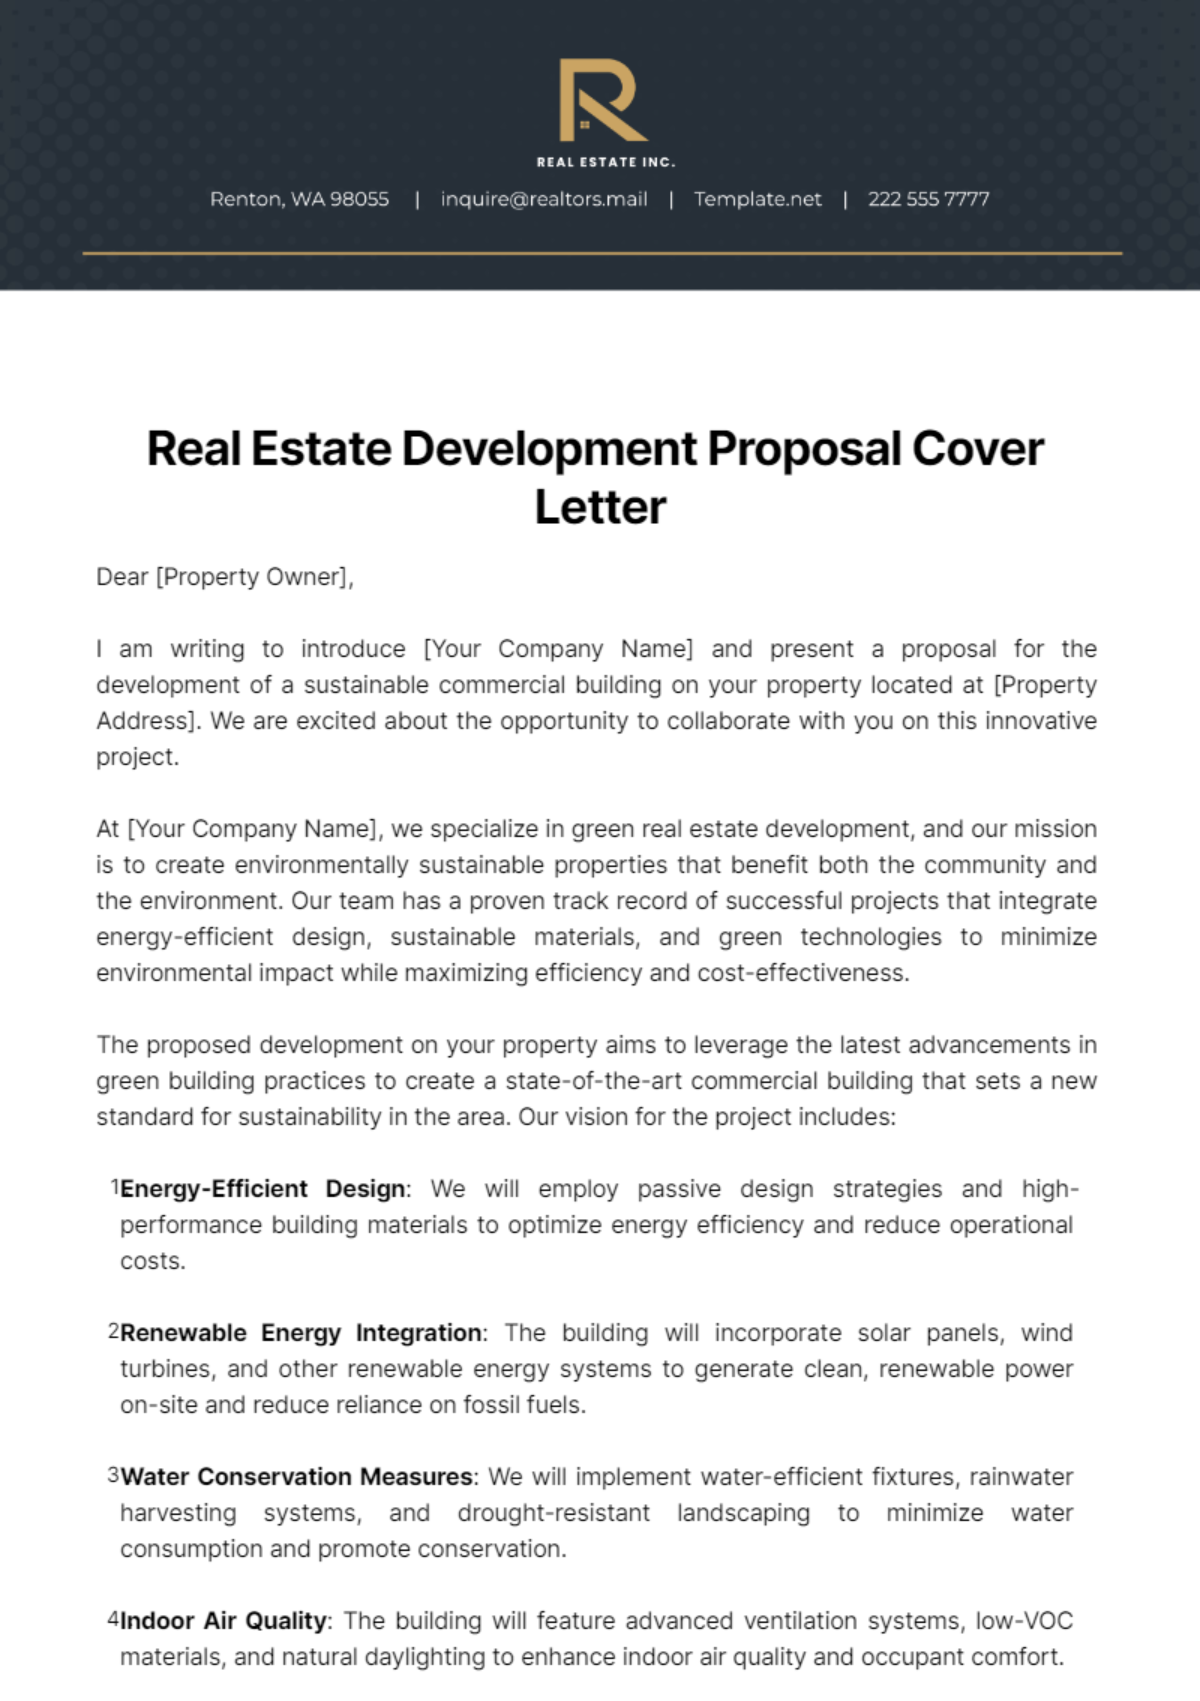 Real Estate Development Proposal Cover Letter Template